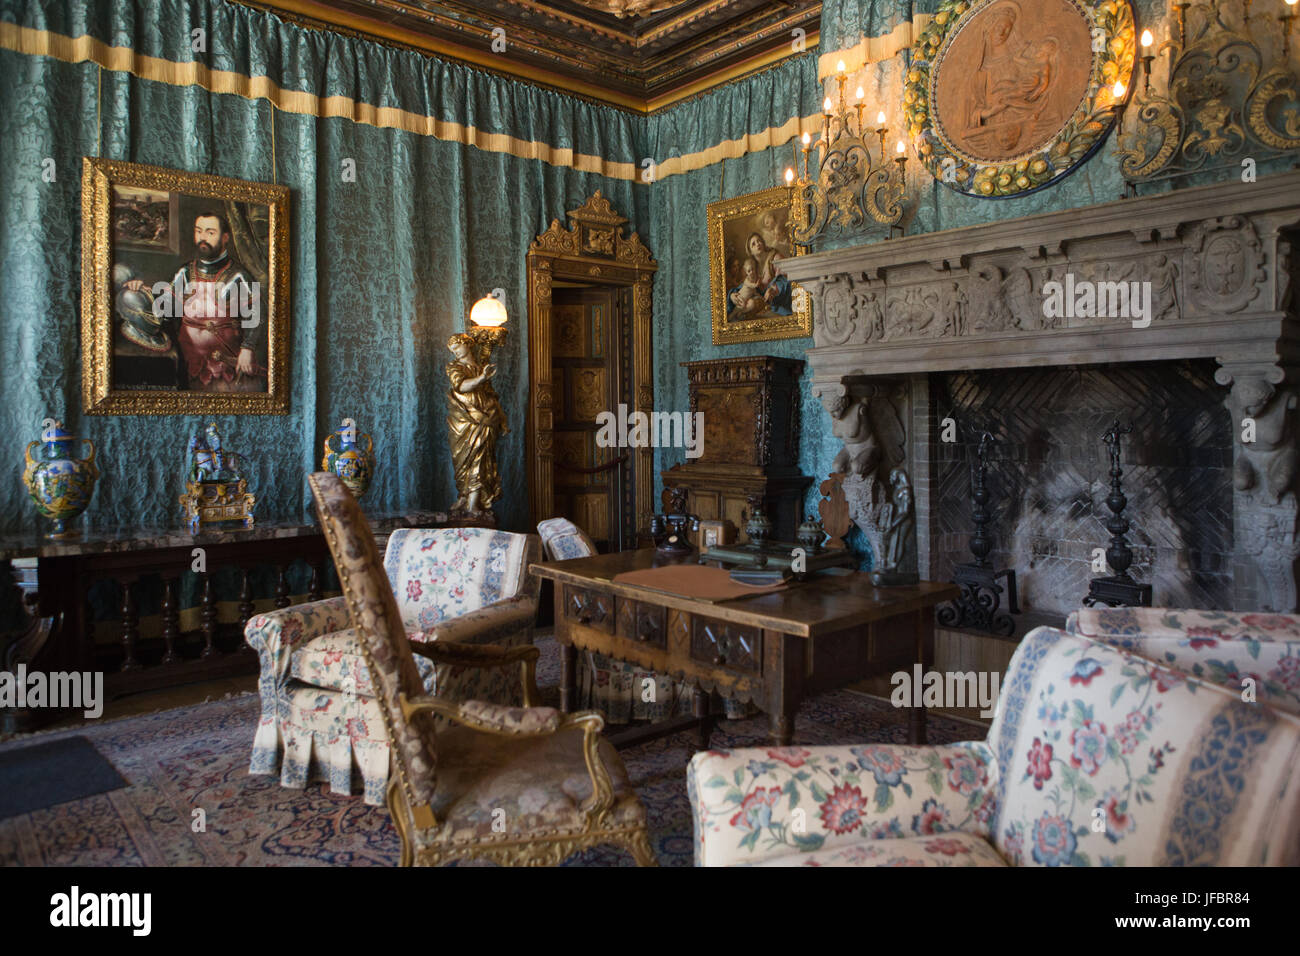 A sitting room, with a fireplace, decorated with furniture, tapestries, artwork and ornate light fixtures. Stock Photo